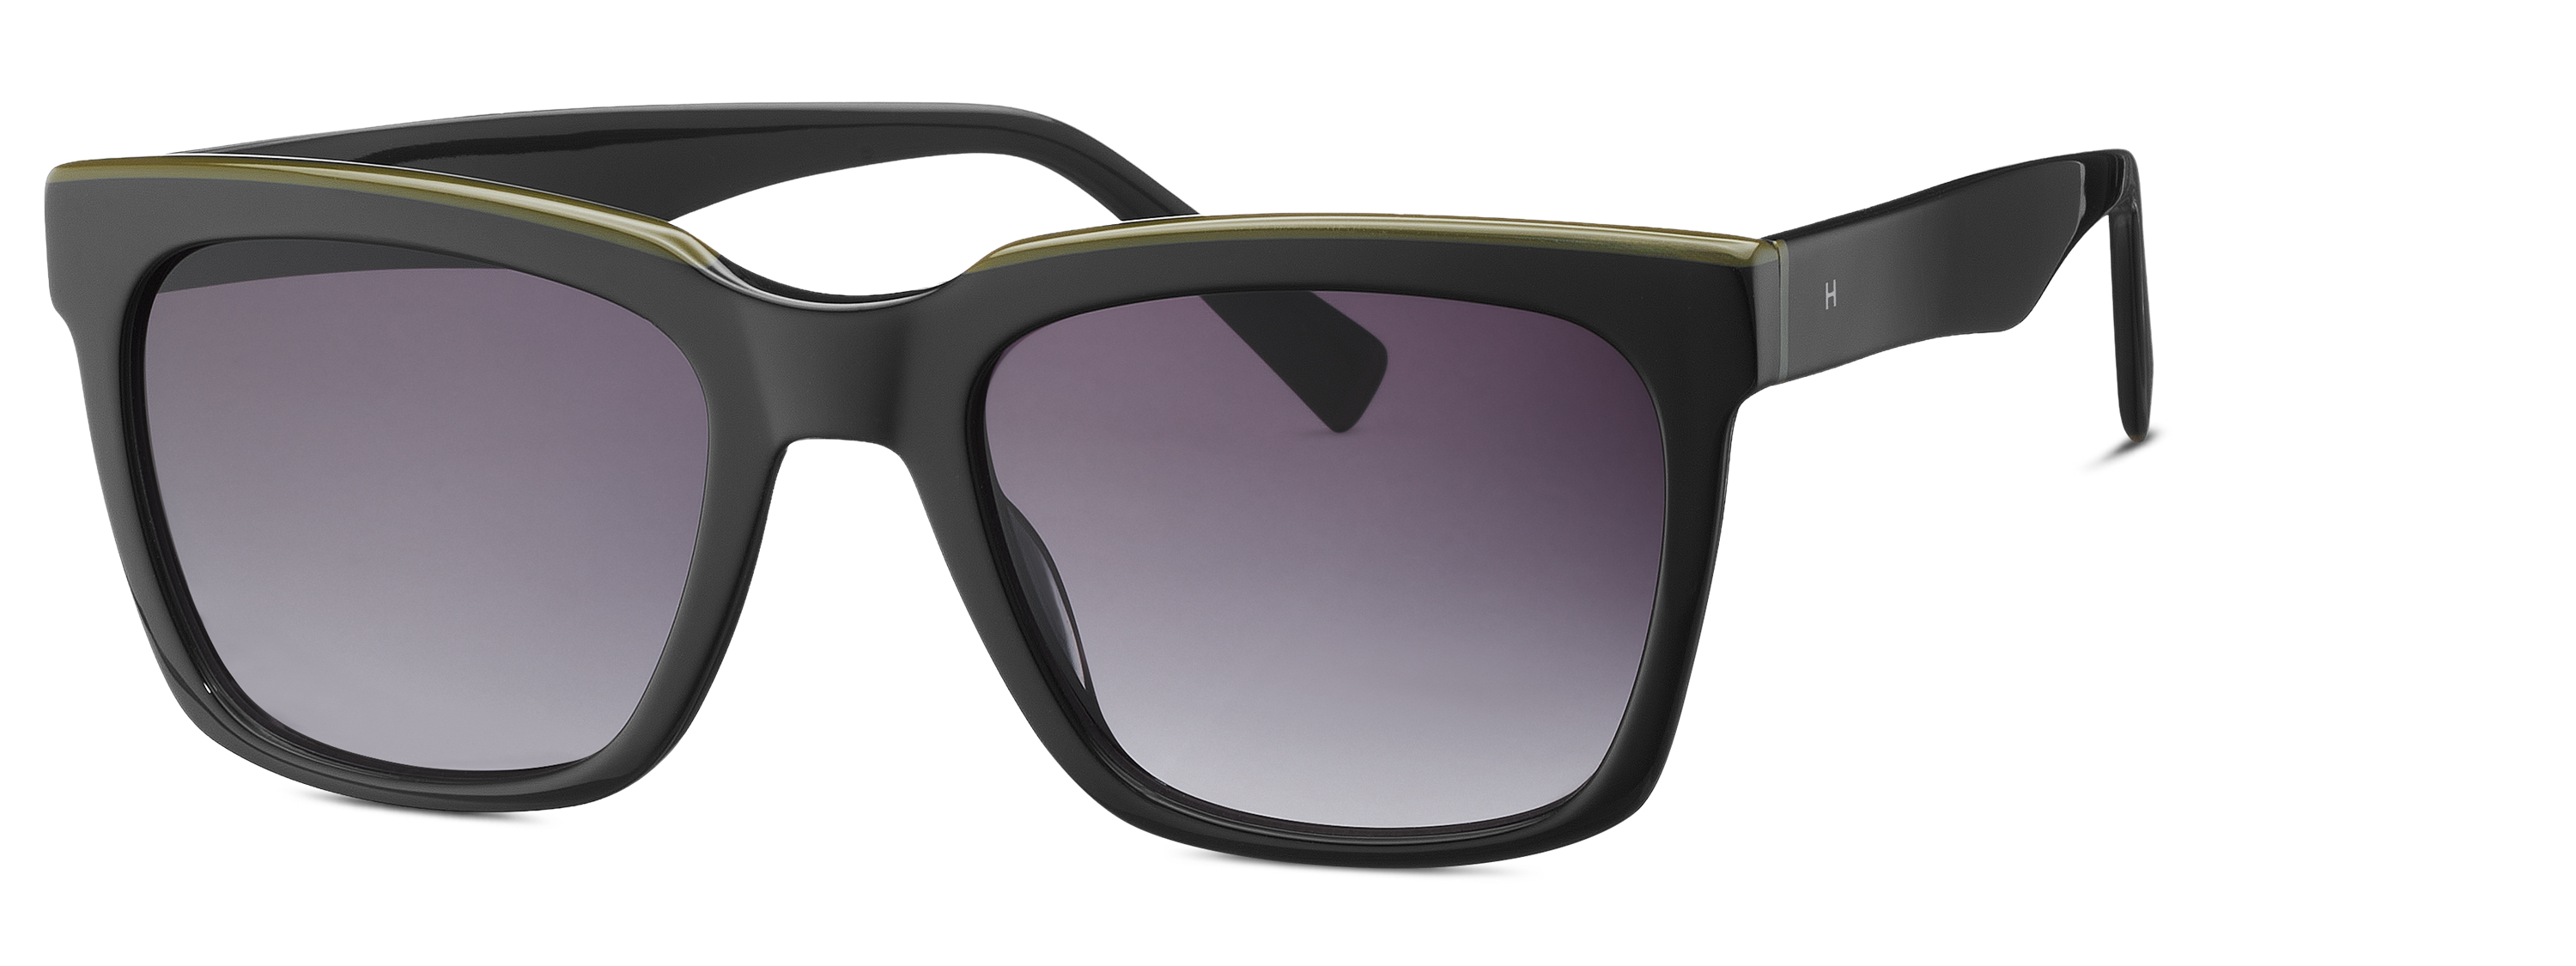 [products.image.front] HUMPHREY´S eyewear 588186 10 Sonnenbrille